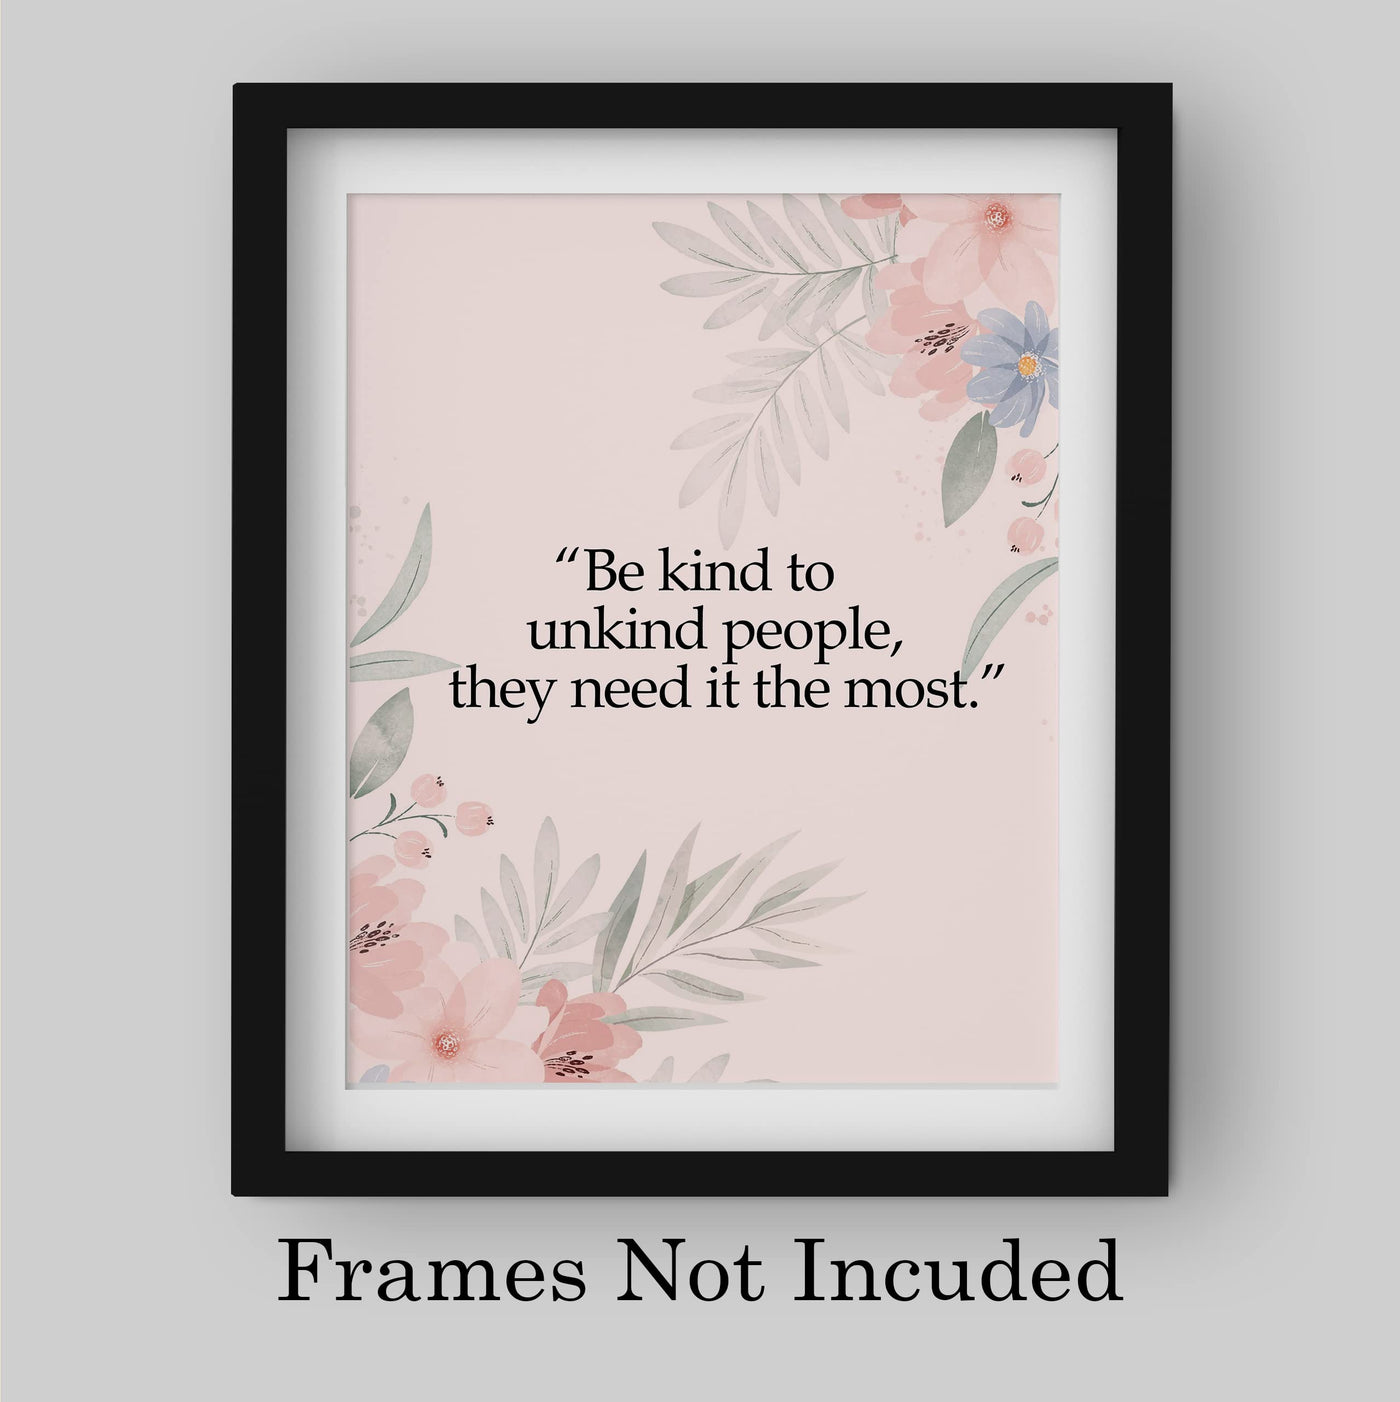 Be Kind to Unkind People Inspirational Quotes Wall Art Sign -8 x 10" Pink Floral Wall Print -Ready to Frame. Motivational Home-Office-Classroom-Library-Positive Decor. Great Gift & Reminder!